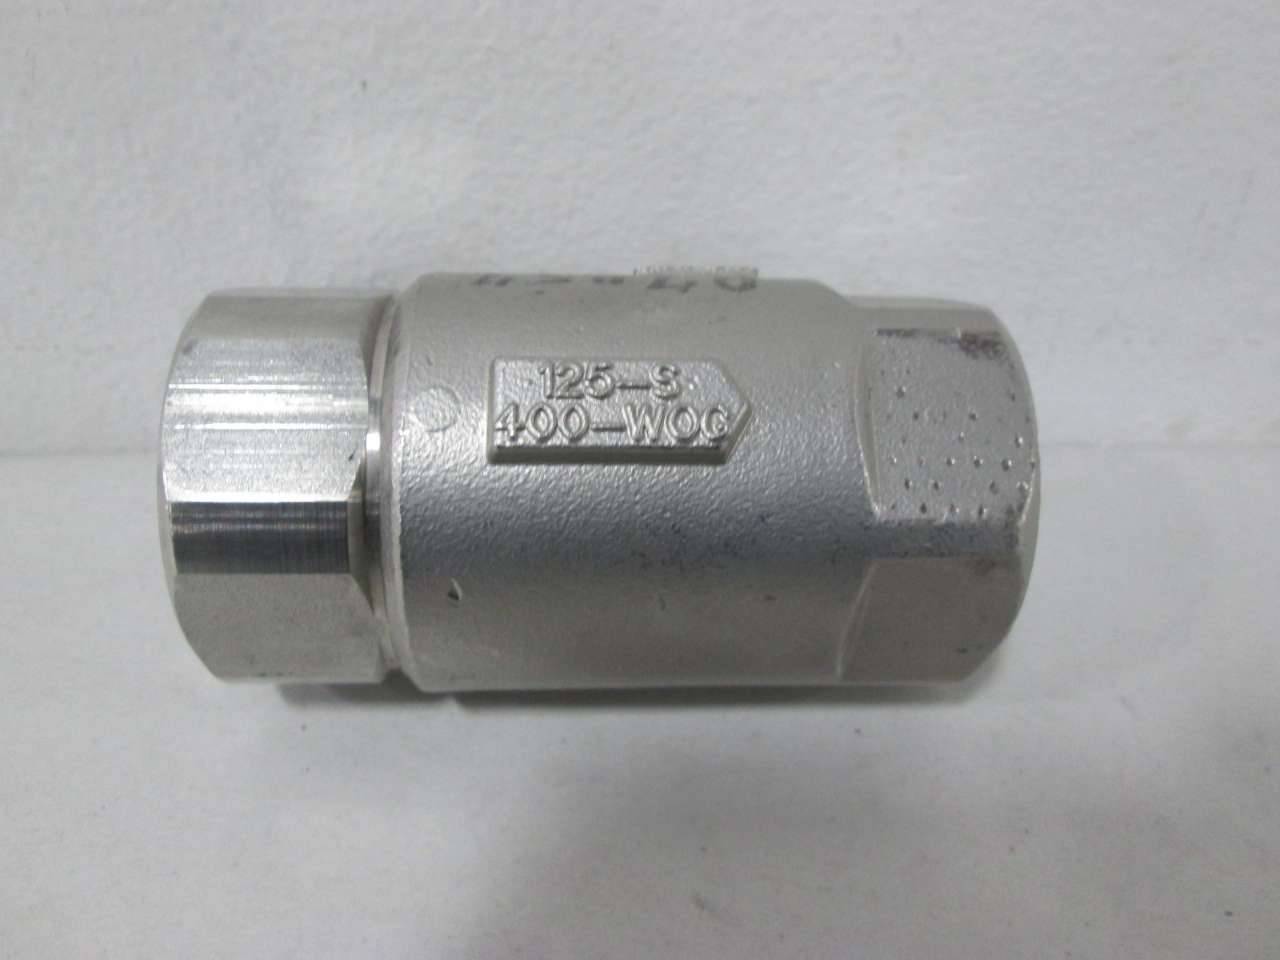 Details about  / C11 S//S Check Valve 1//2/" FNPT 125-S 400 WOG CF8M Removed From New Equipment New